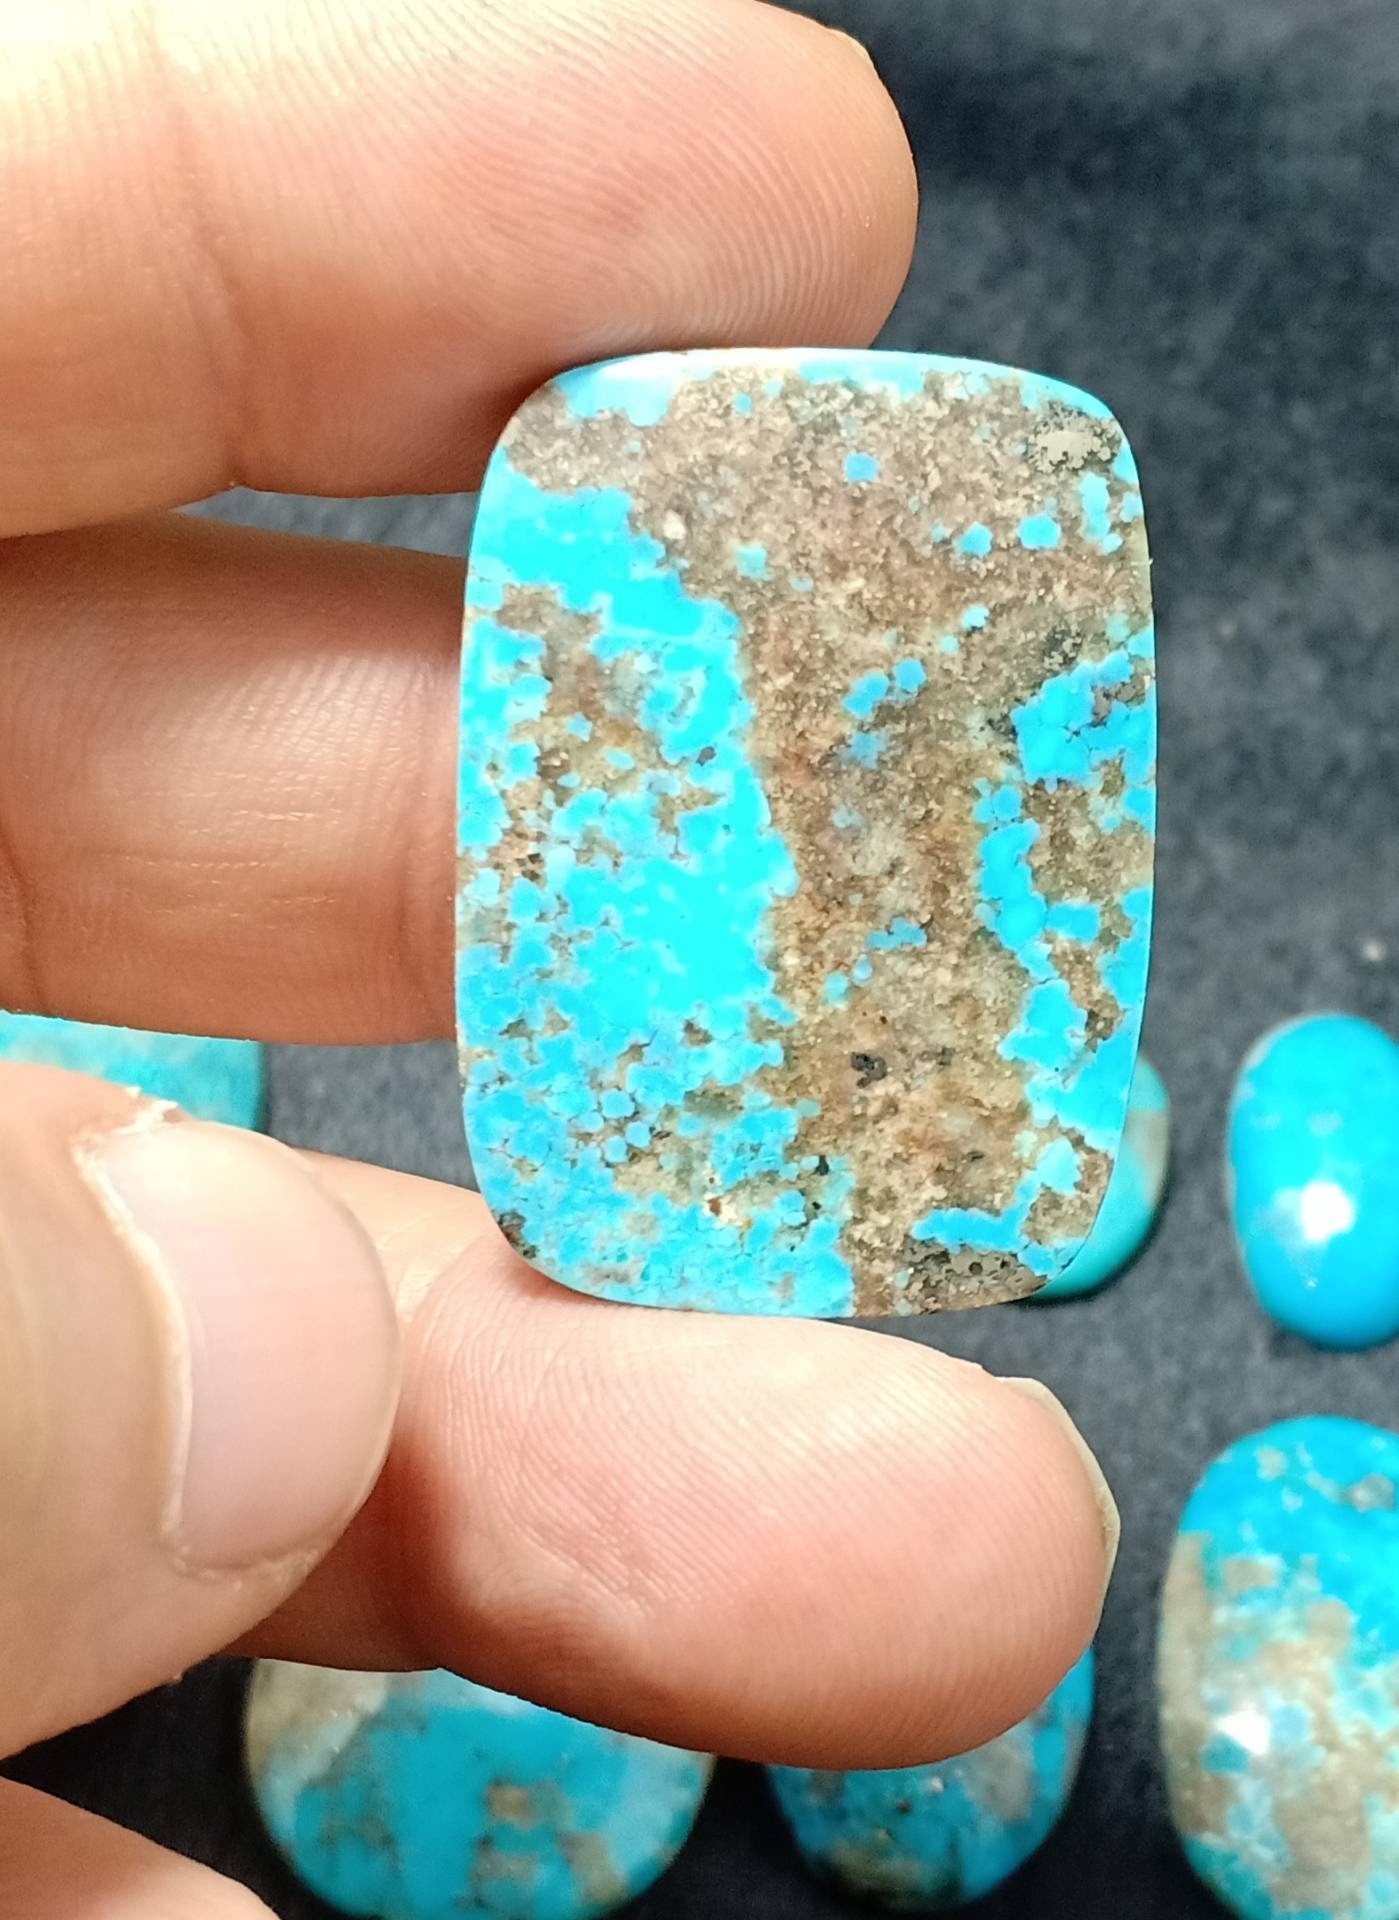 An amazing  lot of 8 turquoise Cabochons 51 grams